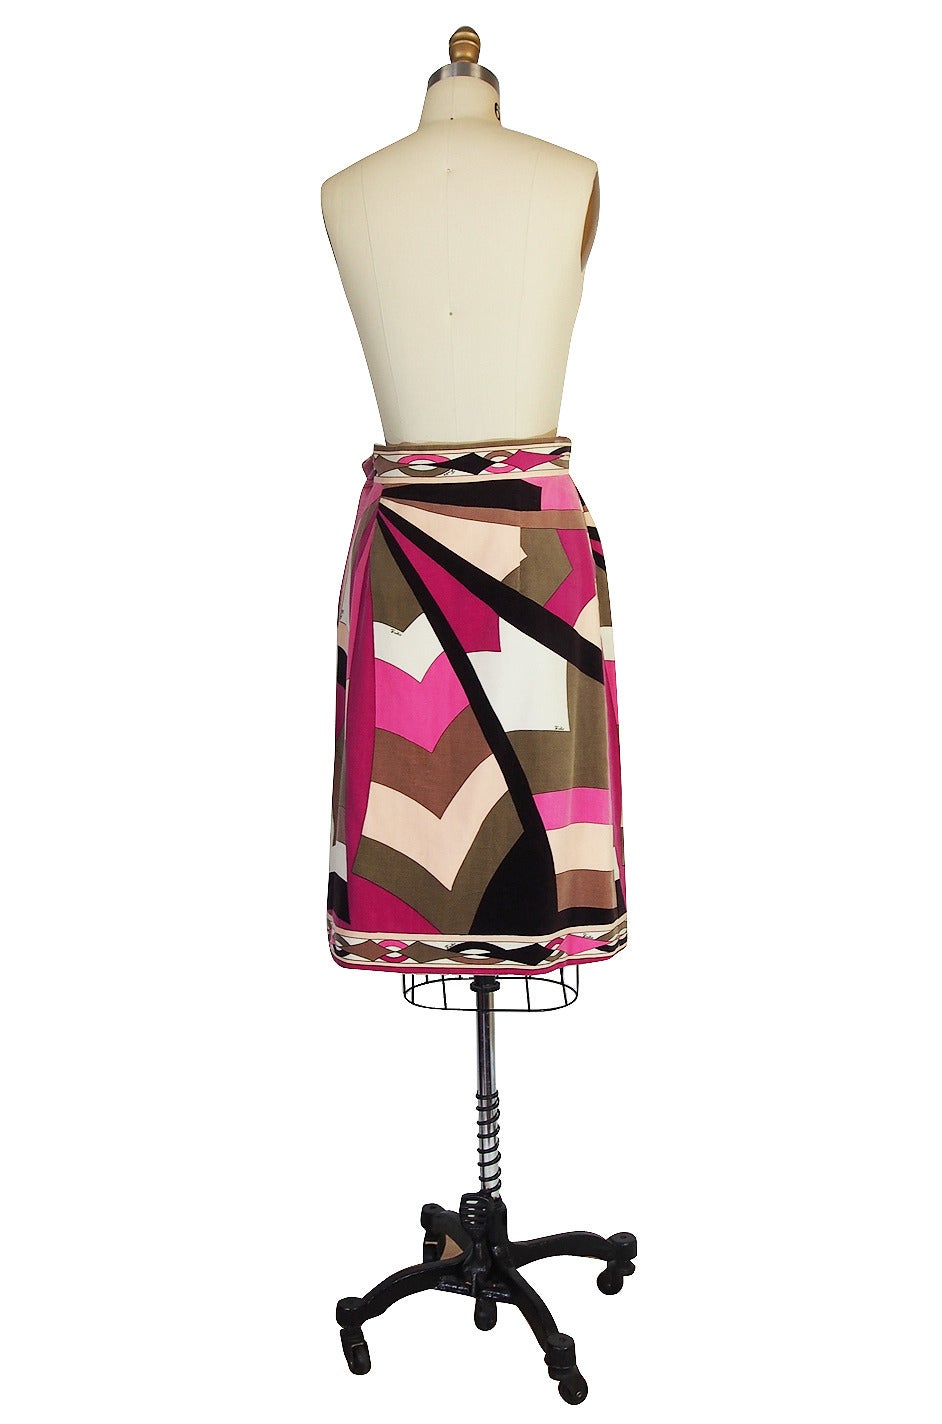 Gorgeous cotton velvet skirt by the Emilio Pucci. Made of beautiful cotton velvet that has a pretty mix of pinks and pastels running over its surface. The main parts of the skirt are covered in classic Pucci pattern in two shades of pink, taupe, a